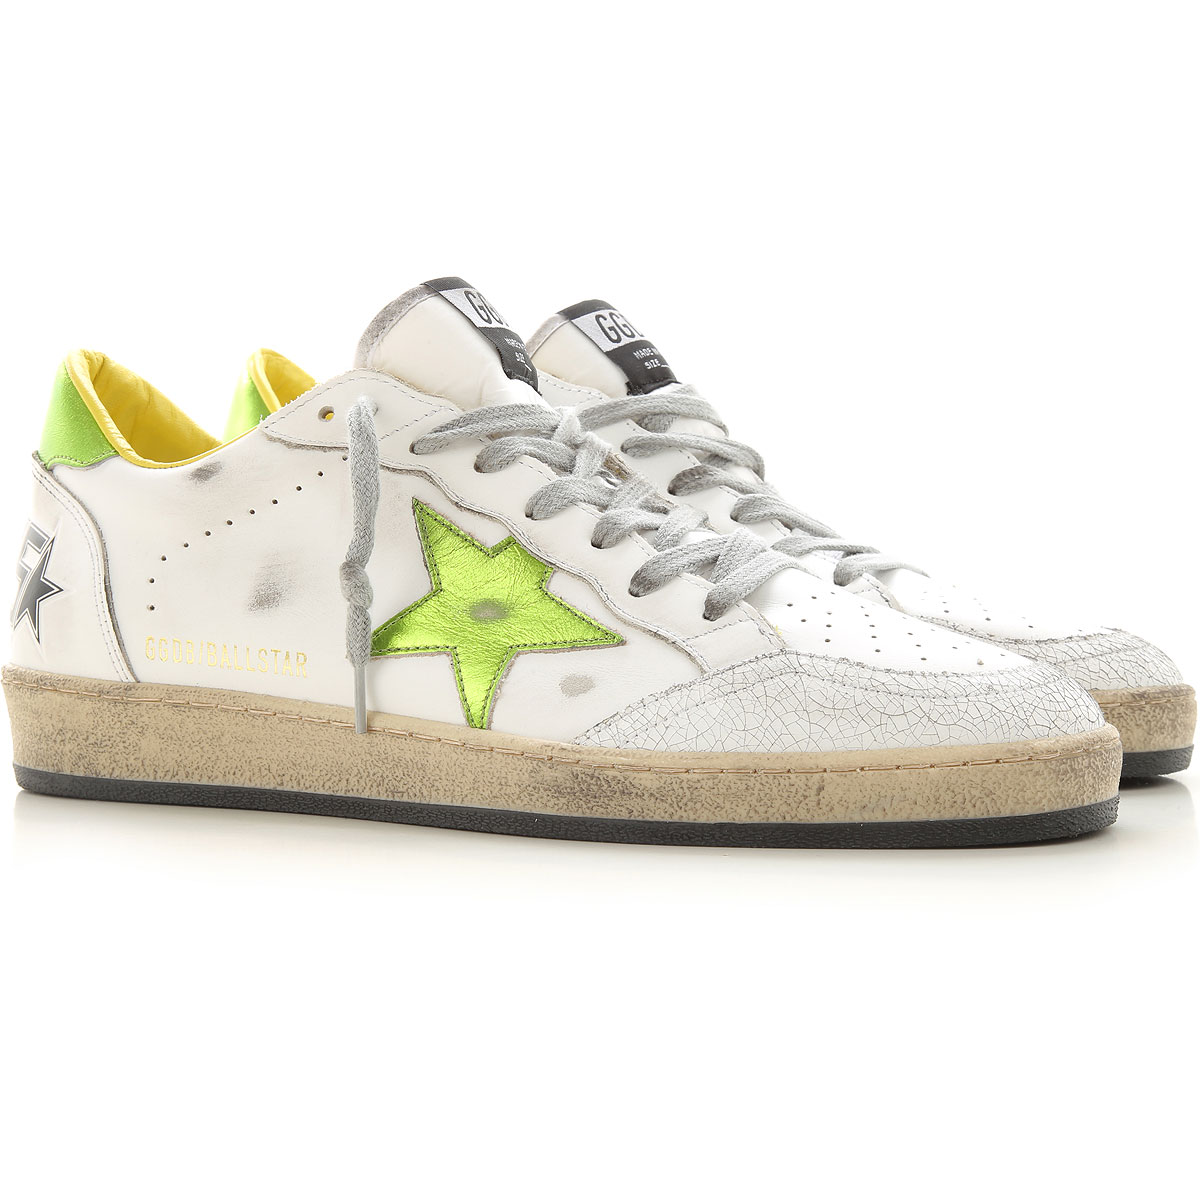 Mens Shoes Golden Goose, Style code: gmf00117-f000383-10293